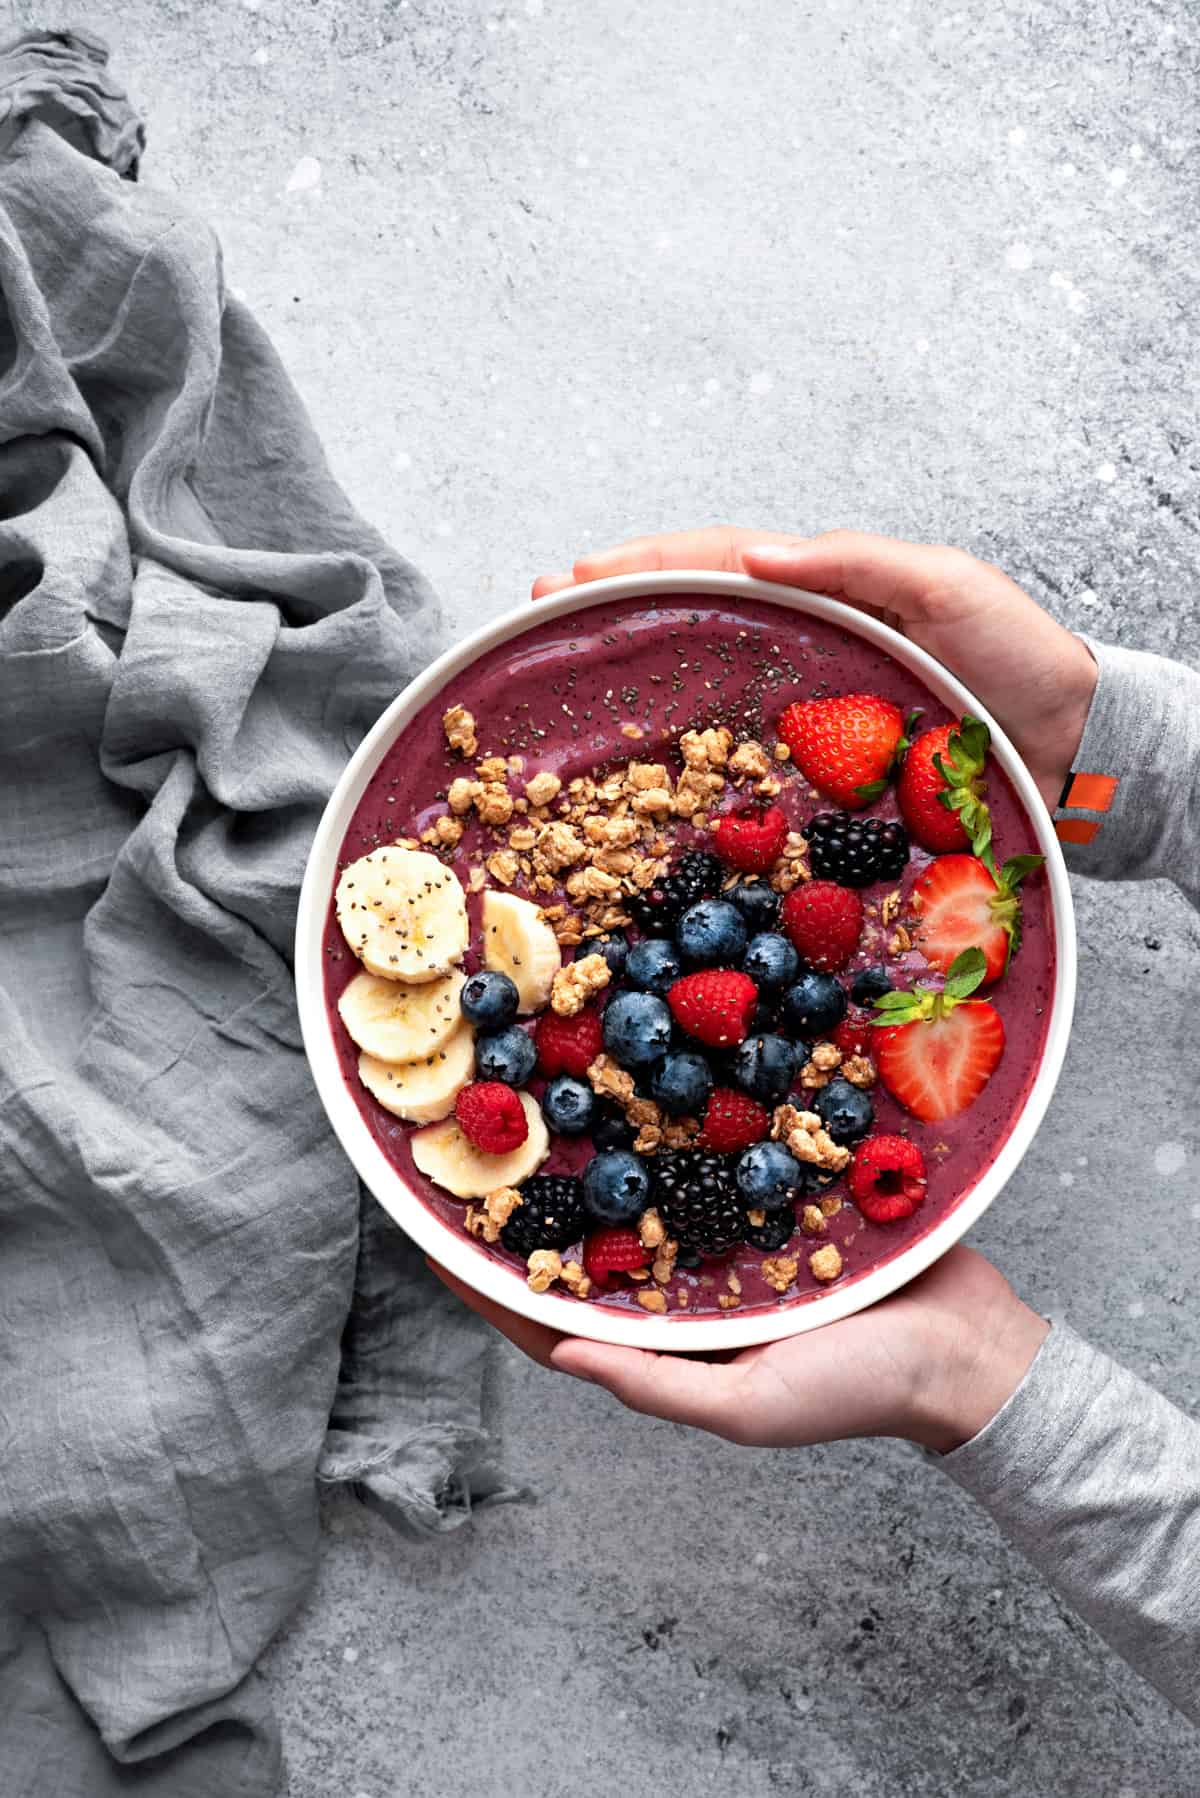 Two hands holding a large white bowl with blended acai berry smoothie, topped with slices of bananas, granola, fresh blueberries, strawberries, raspberries, and seeds.